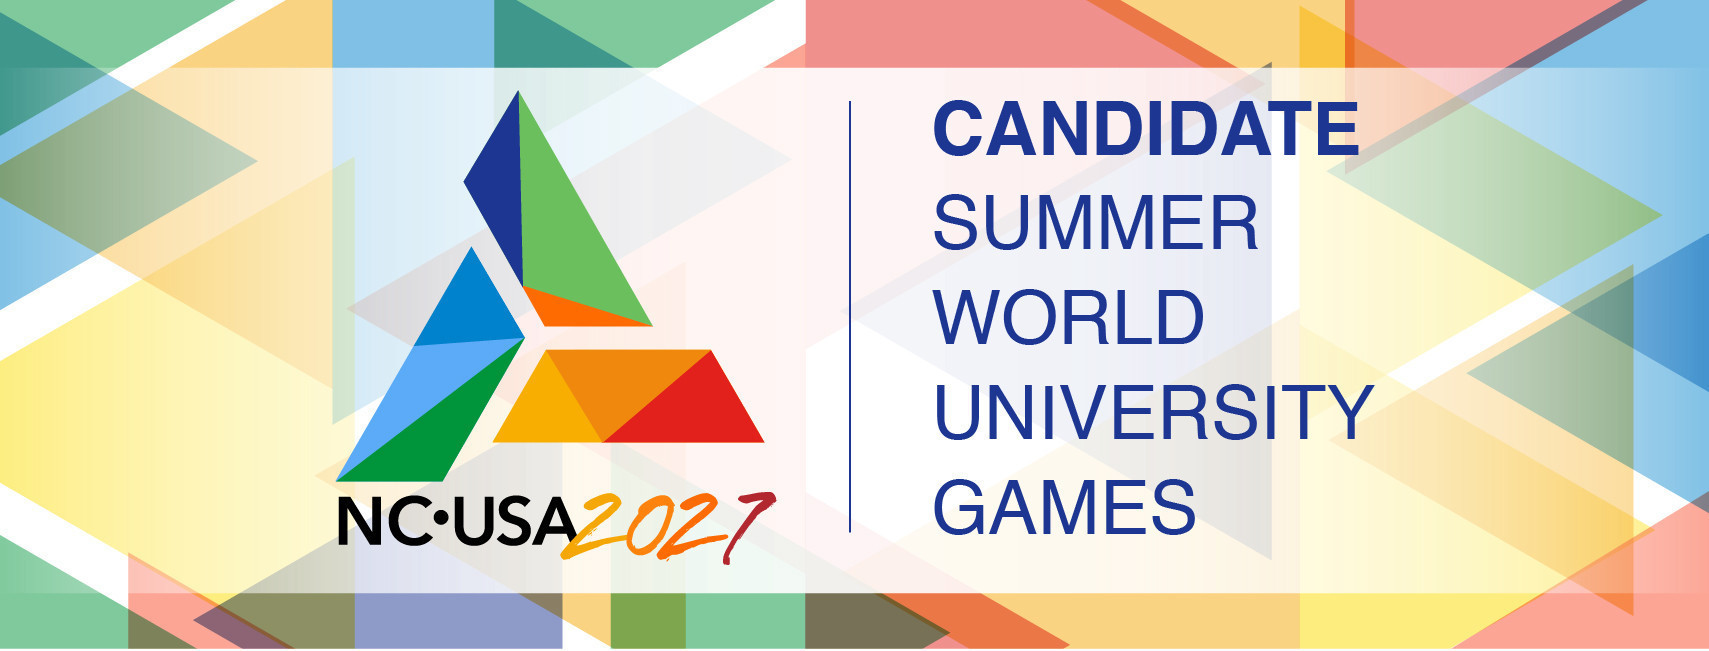 New additions to its Alumni Committee will boost North Carolina's hopes of securing the 2027 Summer World University Games ©North Carolina 2027